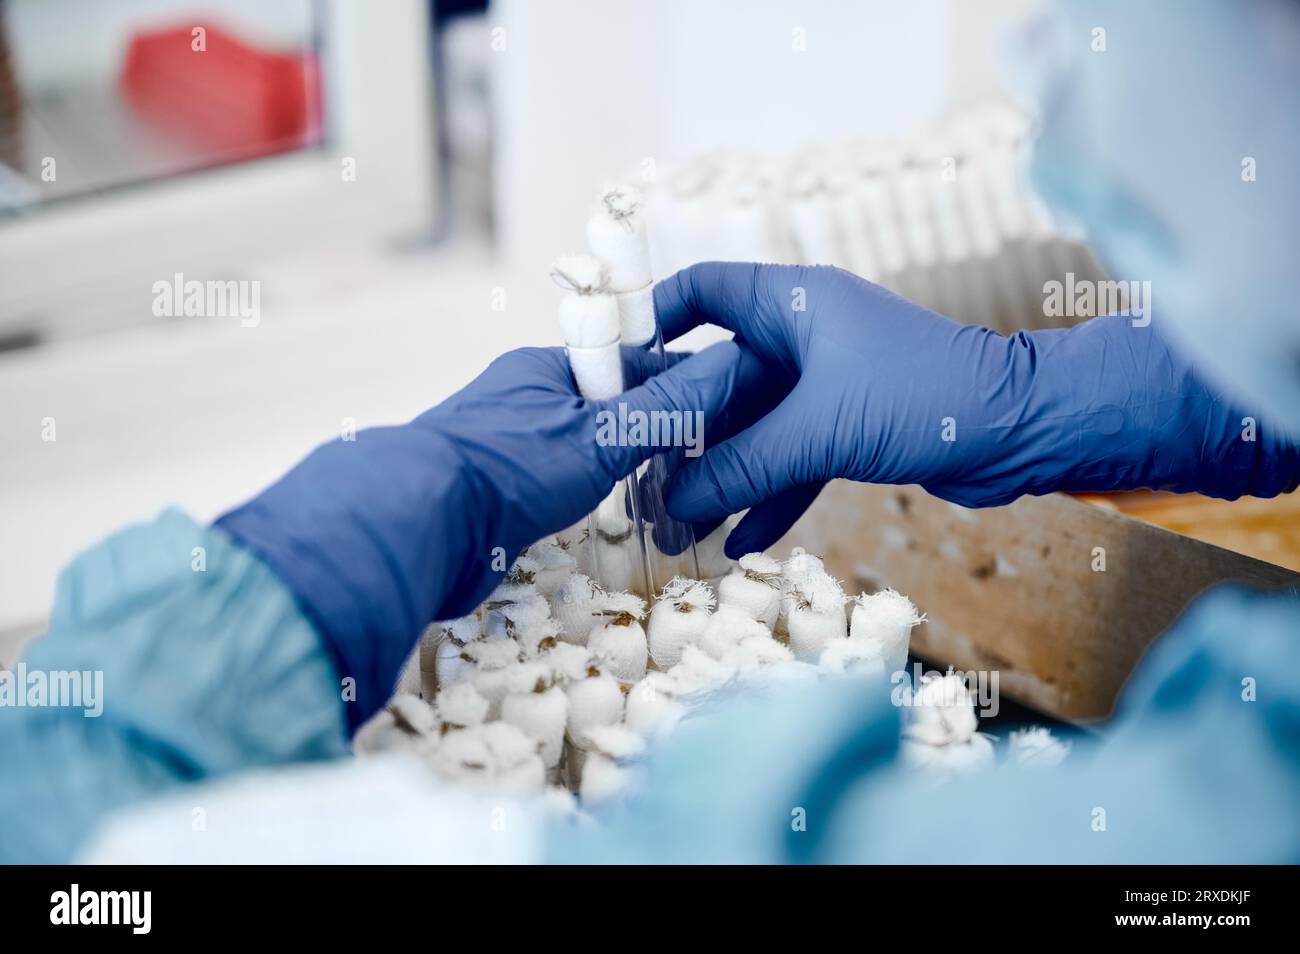 Scientist works with test tubes containing bacterial culture Stock Photo